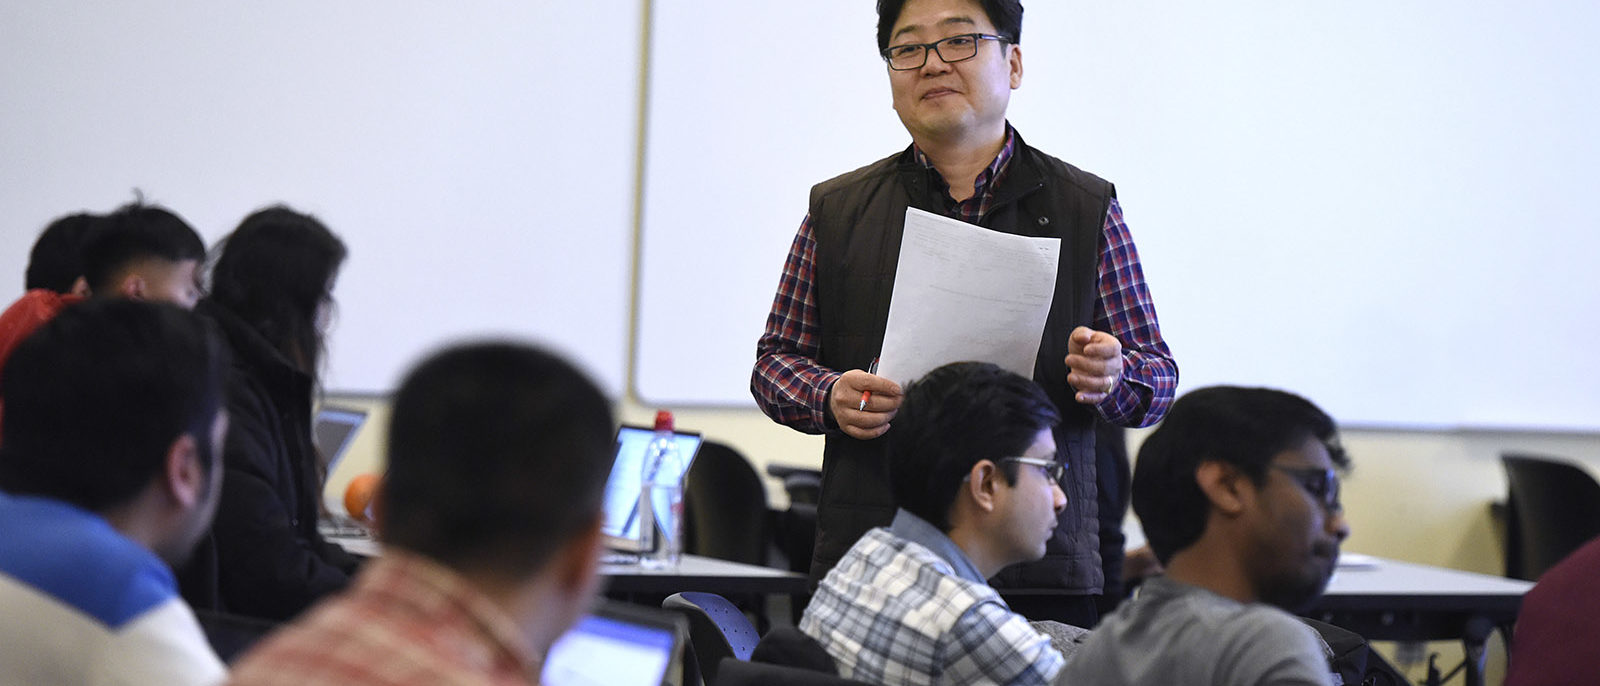 HU to offer In-Person Classes in M.S. Project Management for Direct Students for Spring 2022